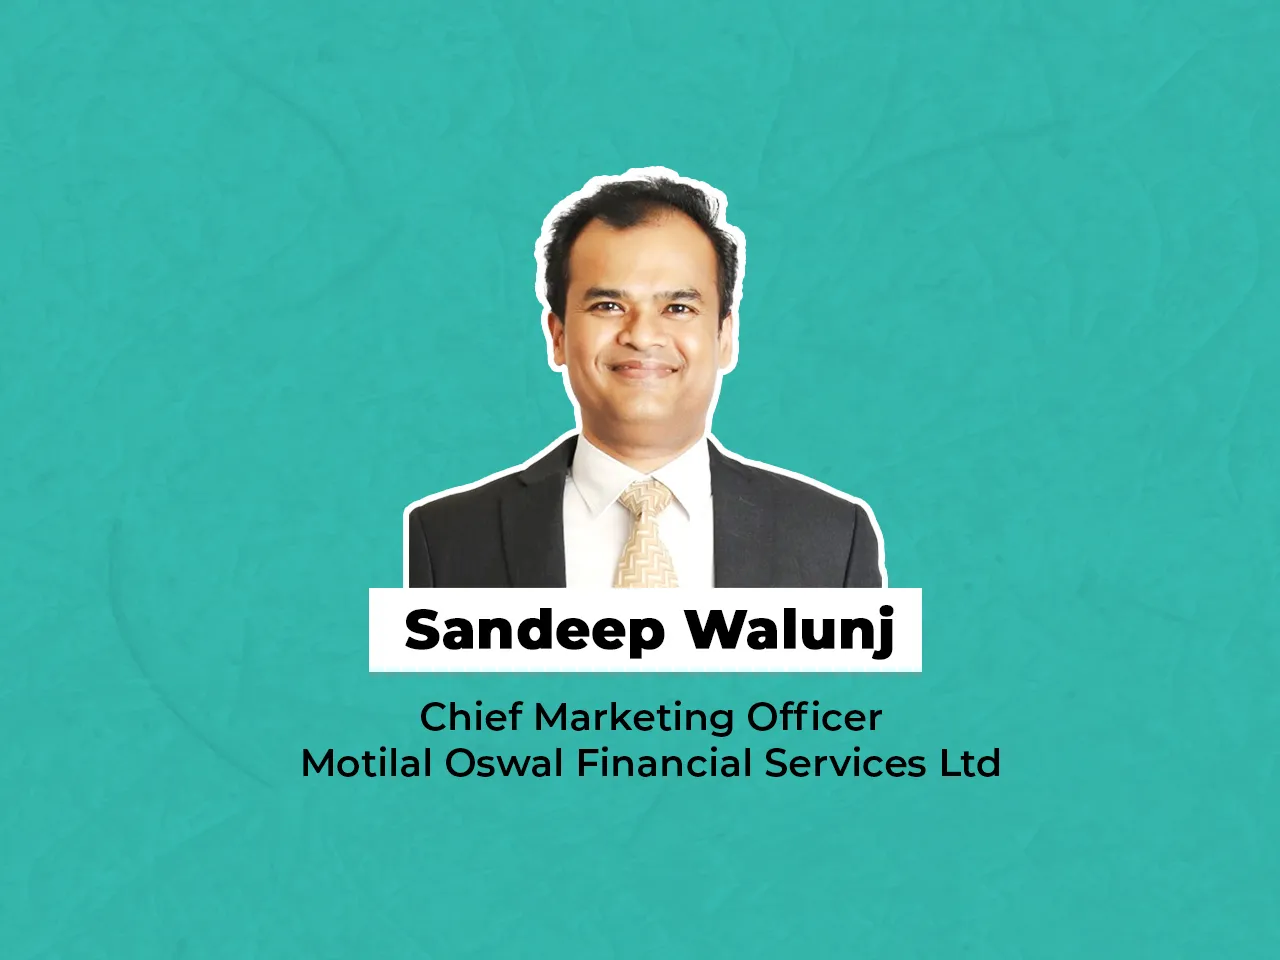 Motilal Oswal Financial Services Ltd appoints Sandeep Walunj as CMO